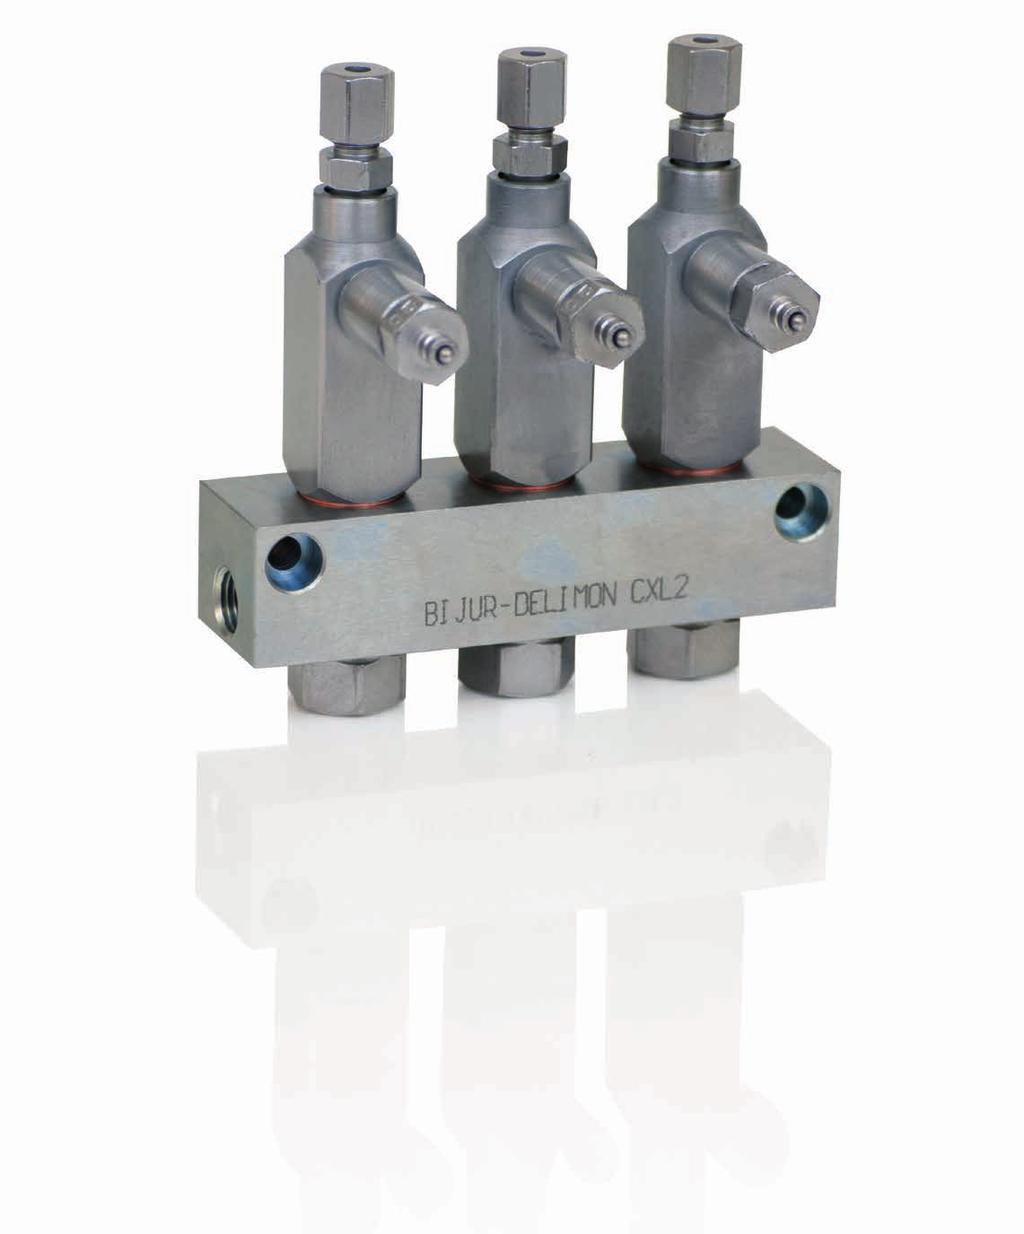 CXL2 Injectors & Manifolds Premium Single Line Grease Systems General Designed for use in single line high pressure automatic grease systems, CXL2 Injectors deliver precise volumes of lubricant at